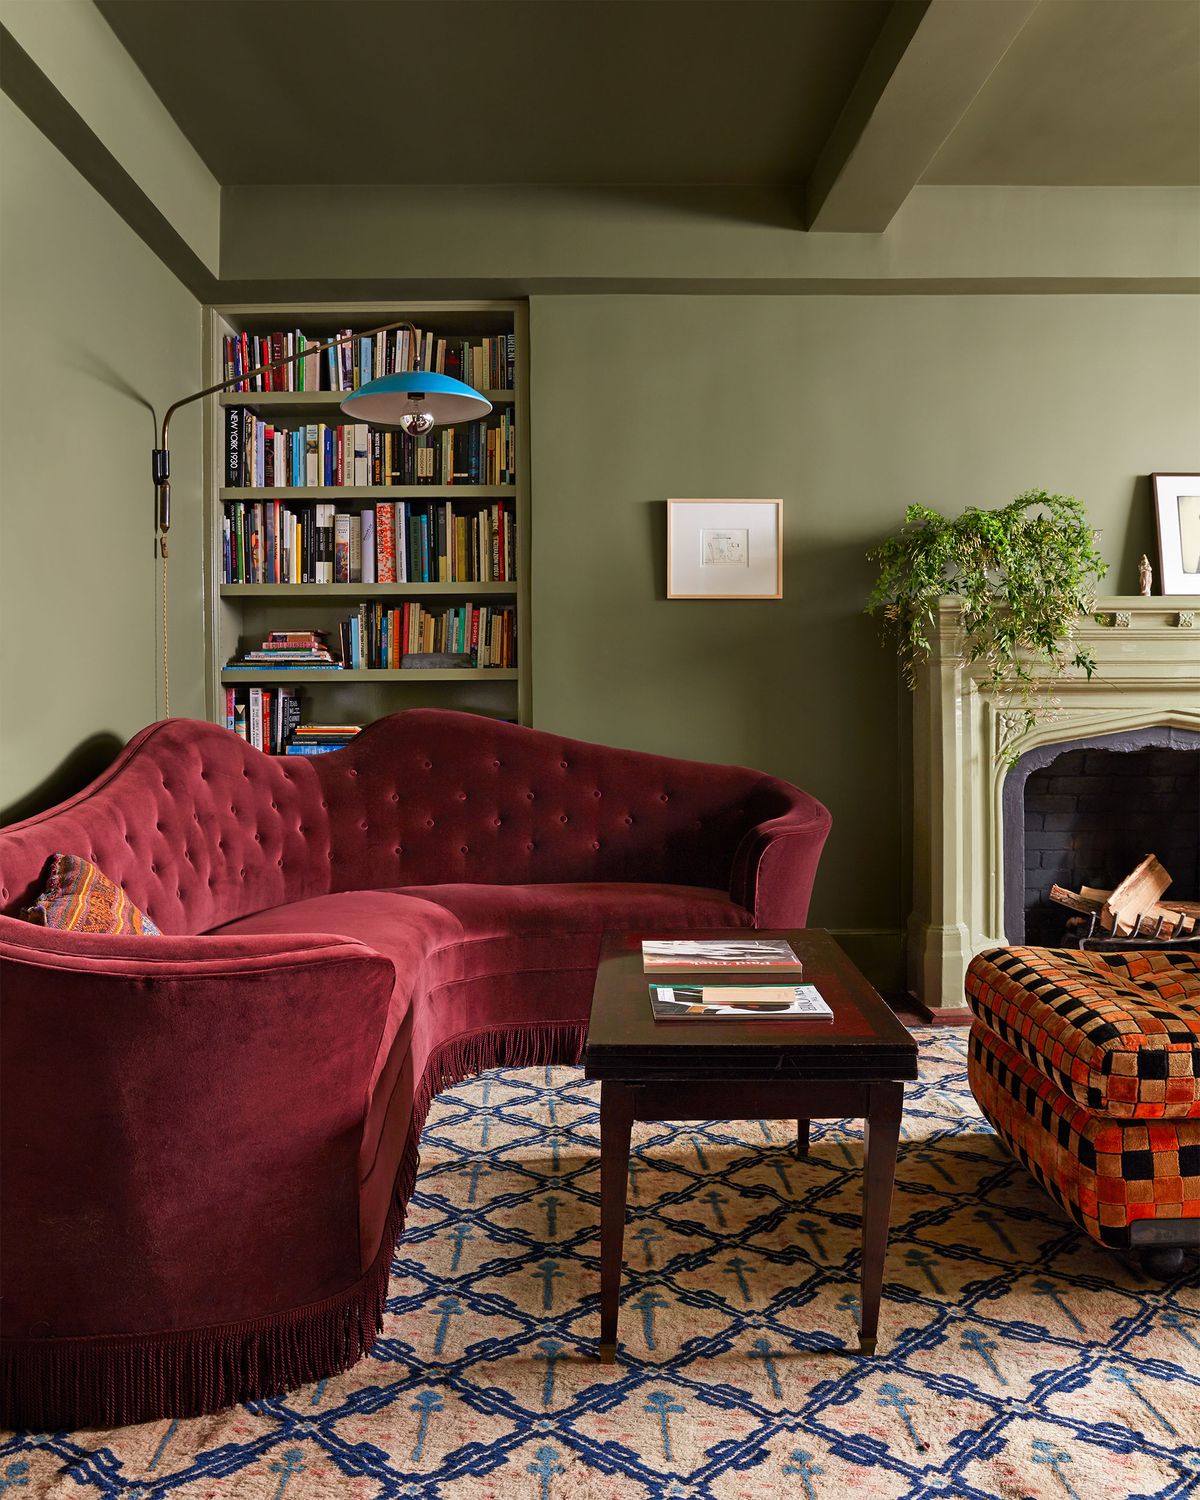 living area with dark green walls and a wraparound sofa in dark reddish orange, a center coffee table and large ottom in orange and brown check fabric on a patterned area rug